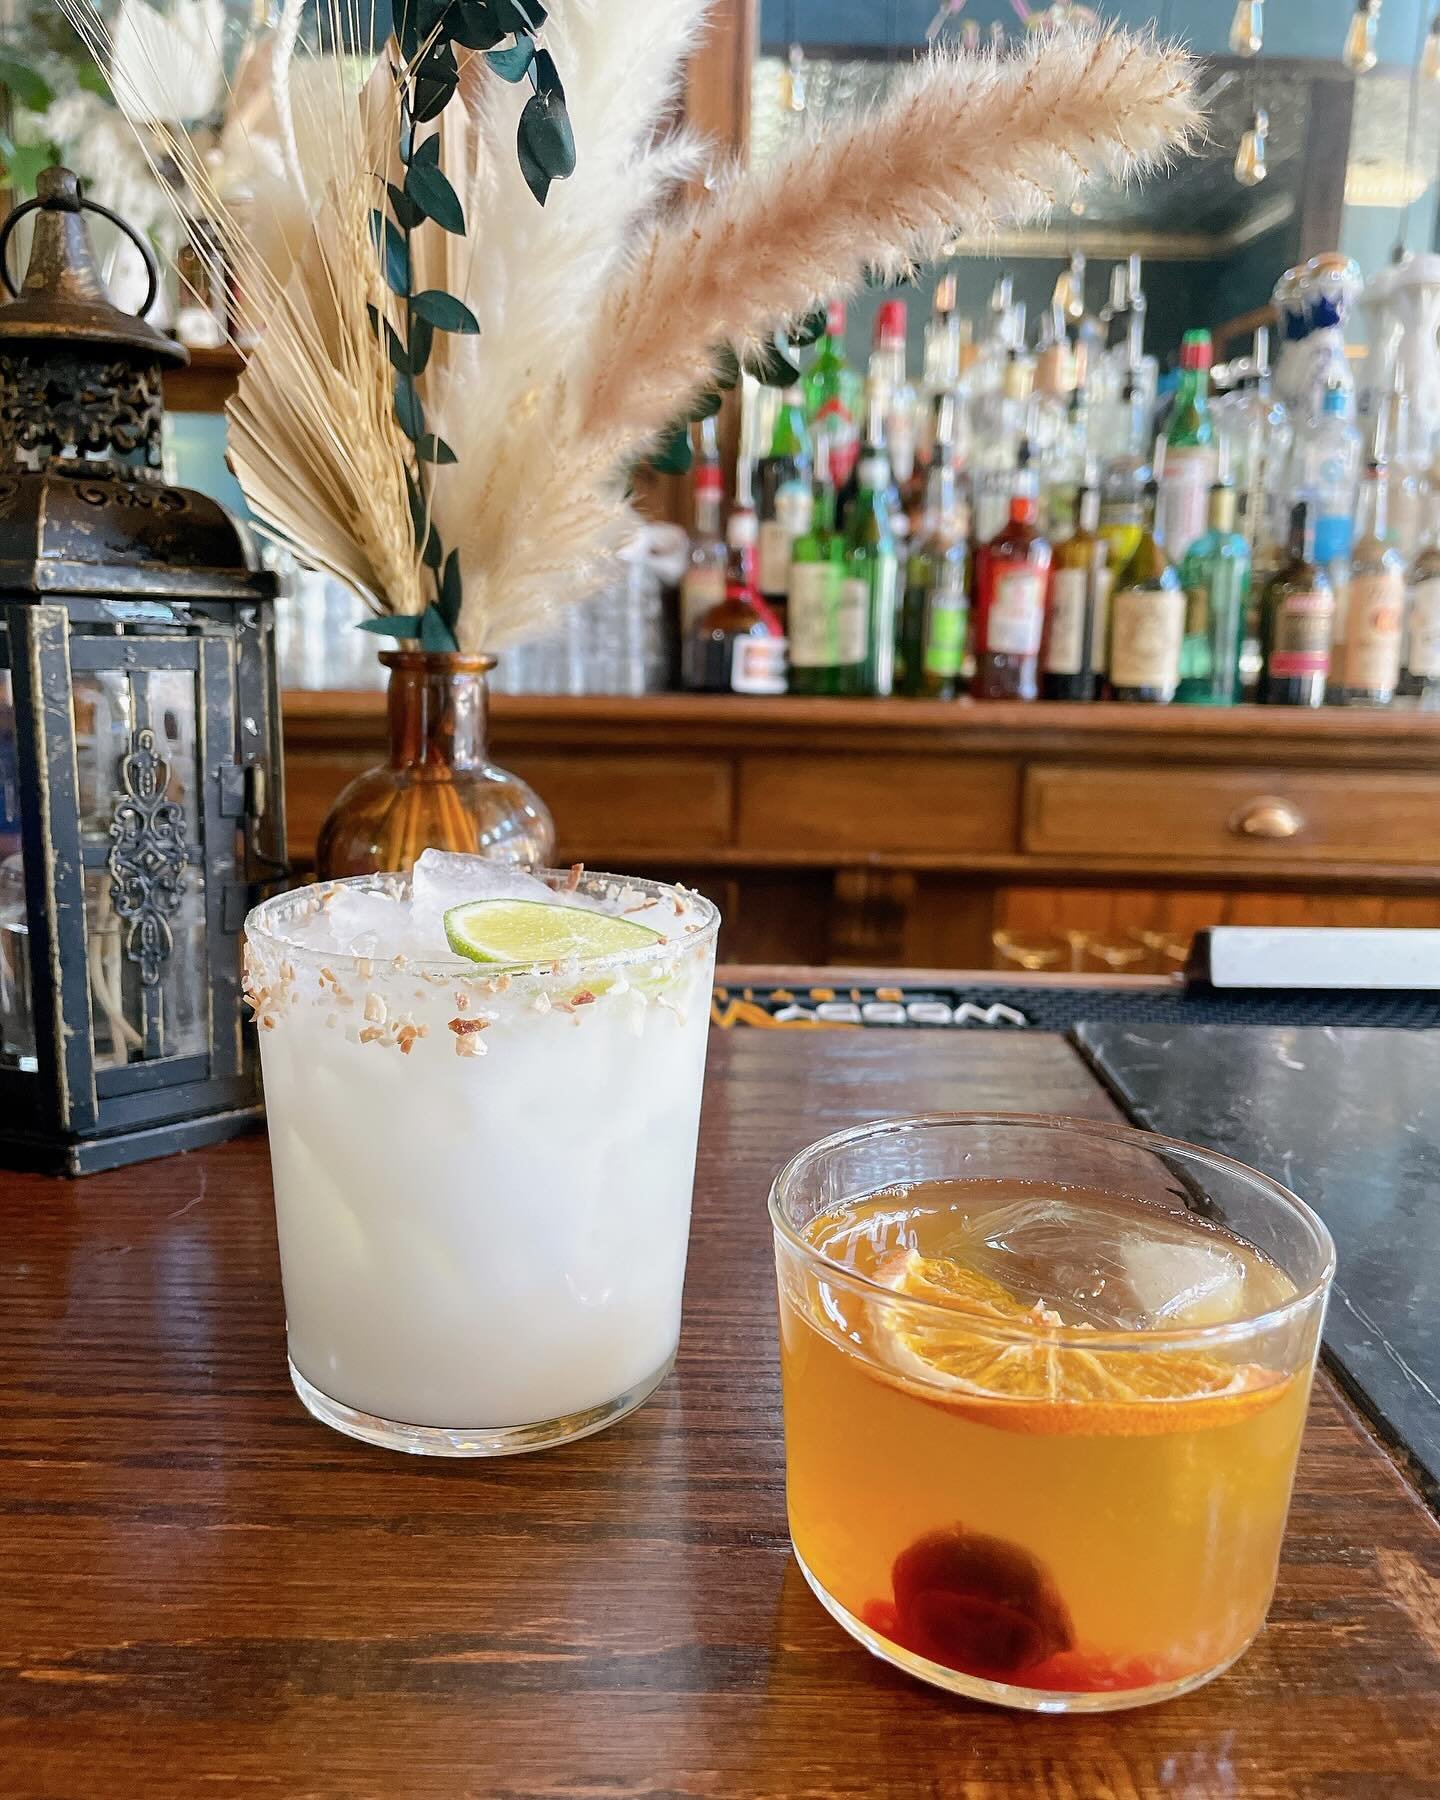 A couple of our classics! The coco margarita and salty old fashioned. We are brainstorming new drink ideas this off season. 🤔 What&rsquo;s your fave??